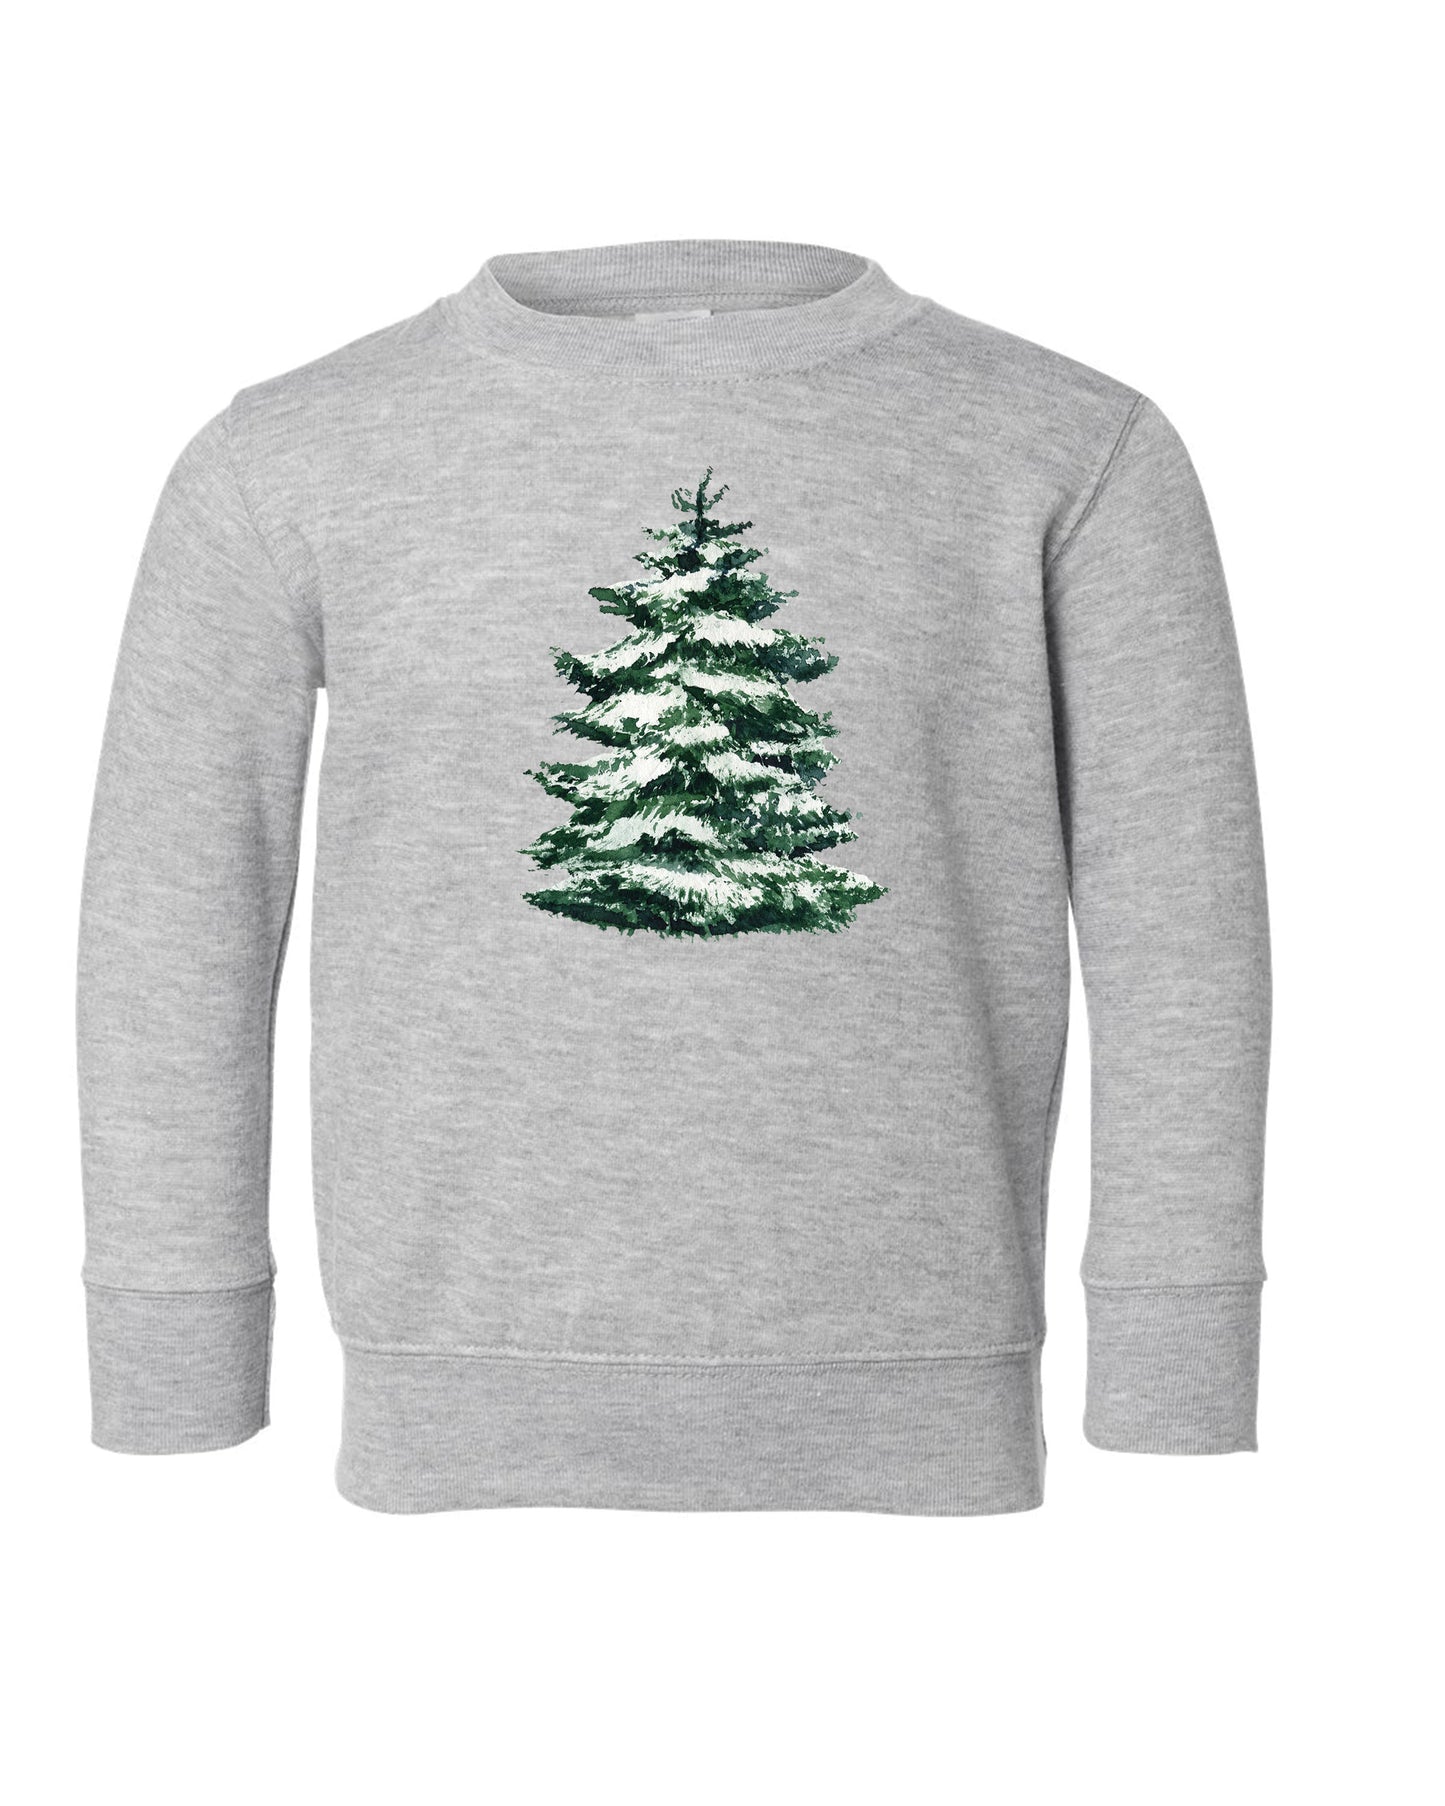 Winter Tree | Kids Pullover-Sister Shirts-Sister Shirts, Cute & Custom Tees for Mama & Littles in Trussville, Alabama.